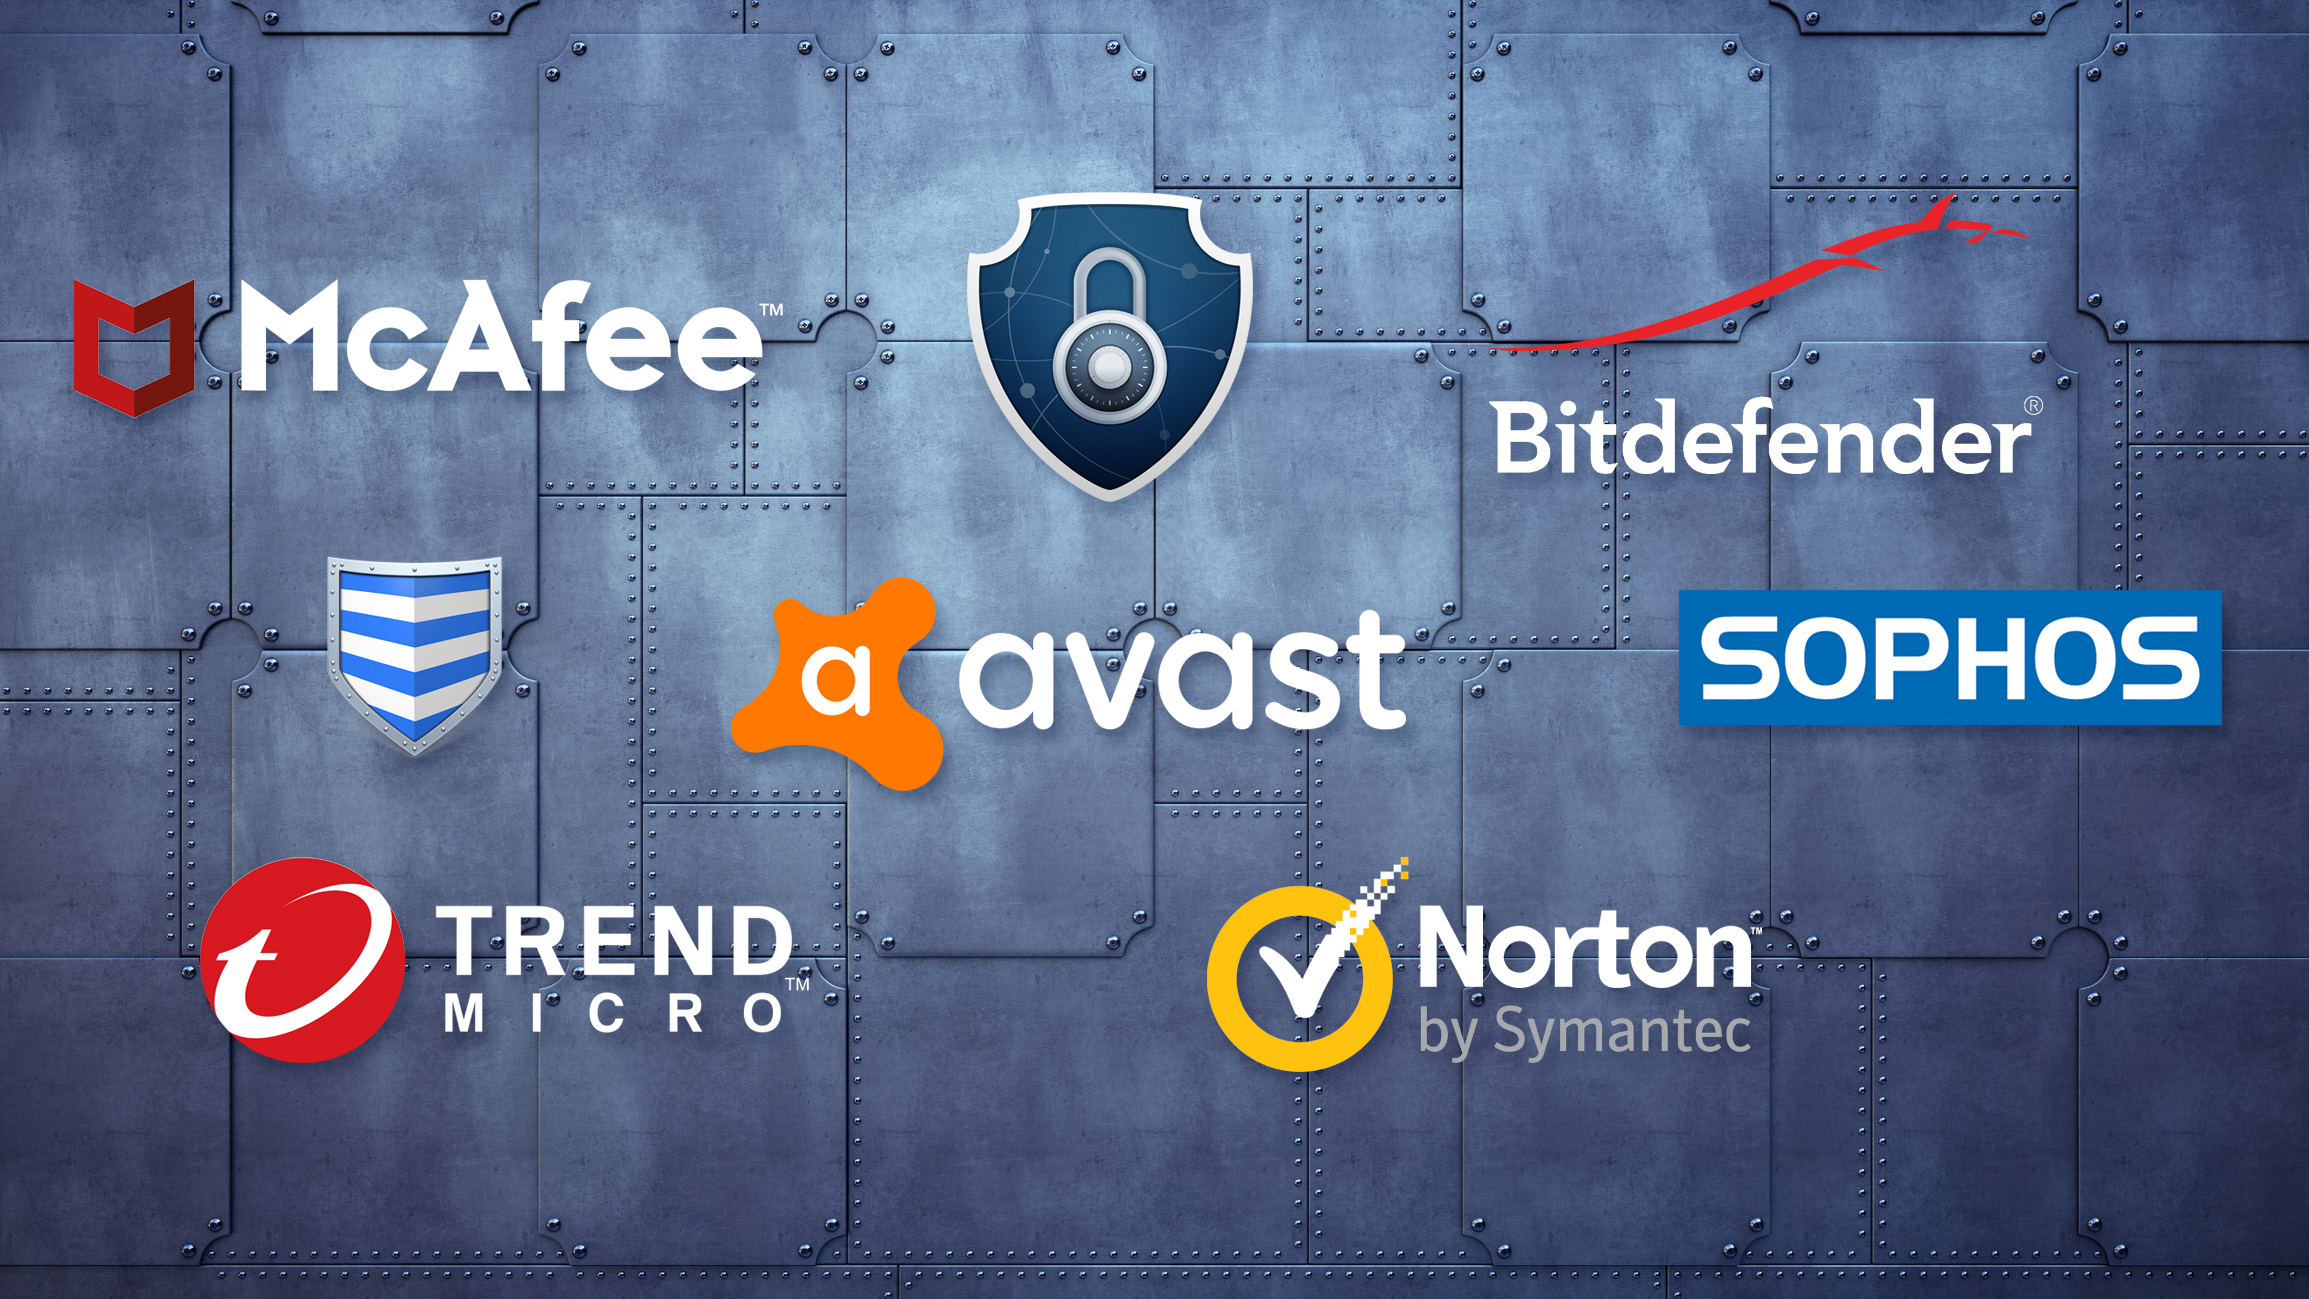 is avast free best for mac